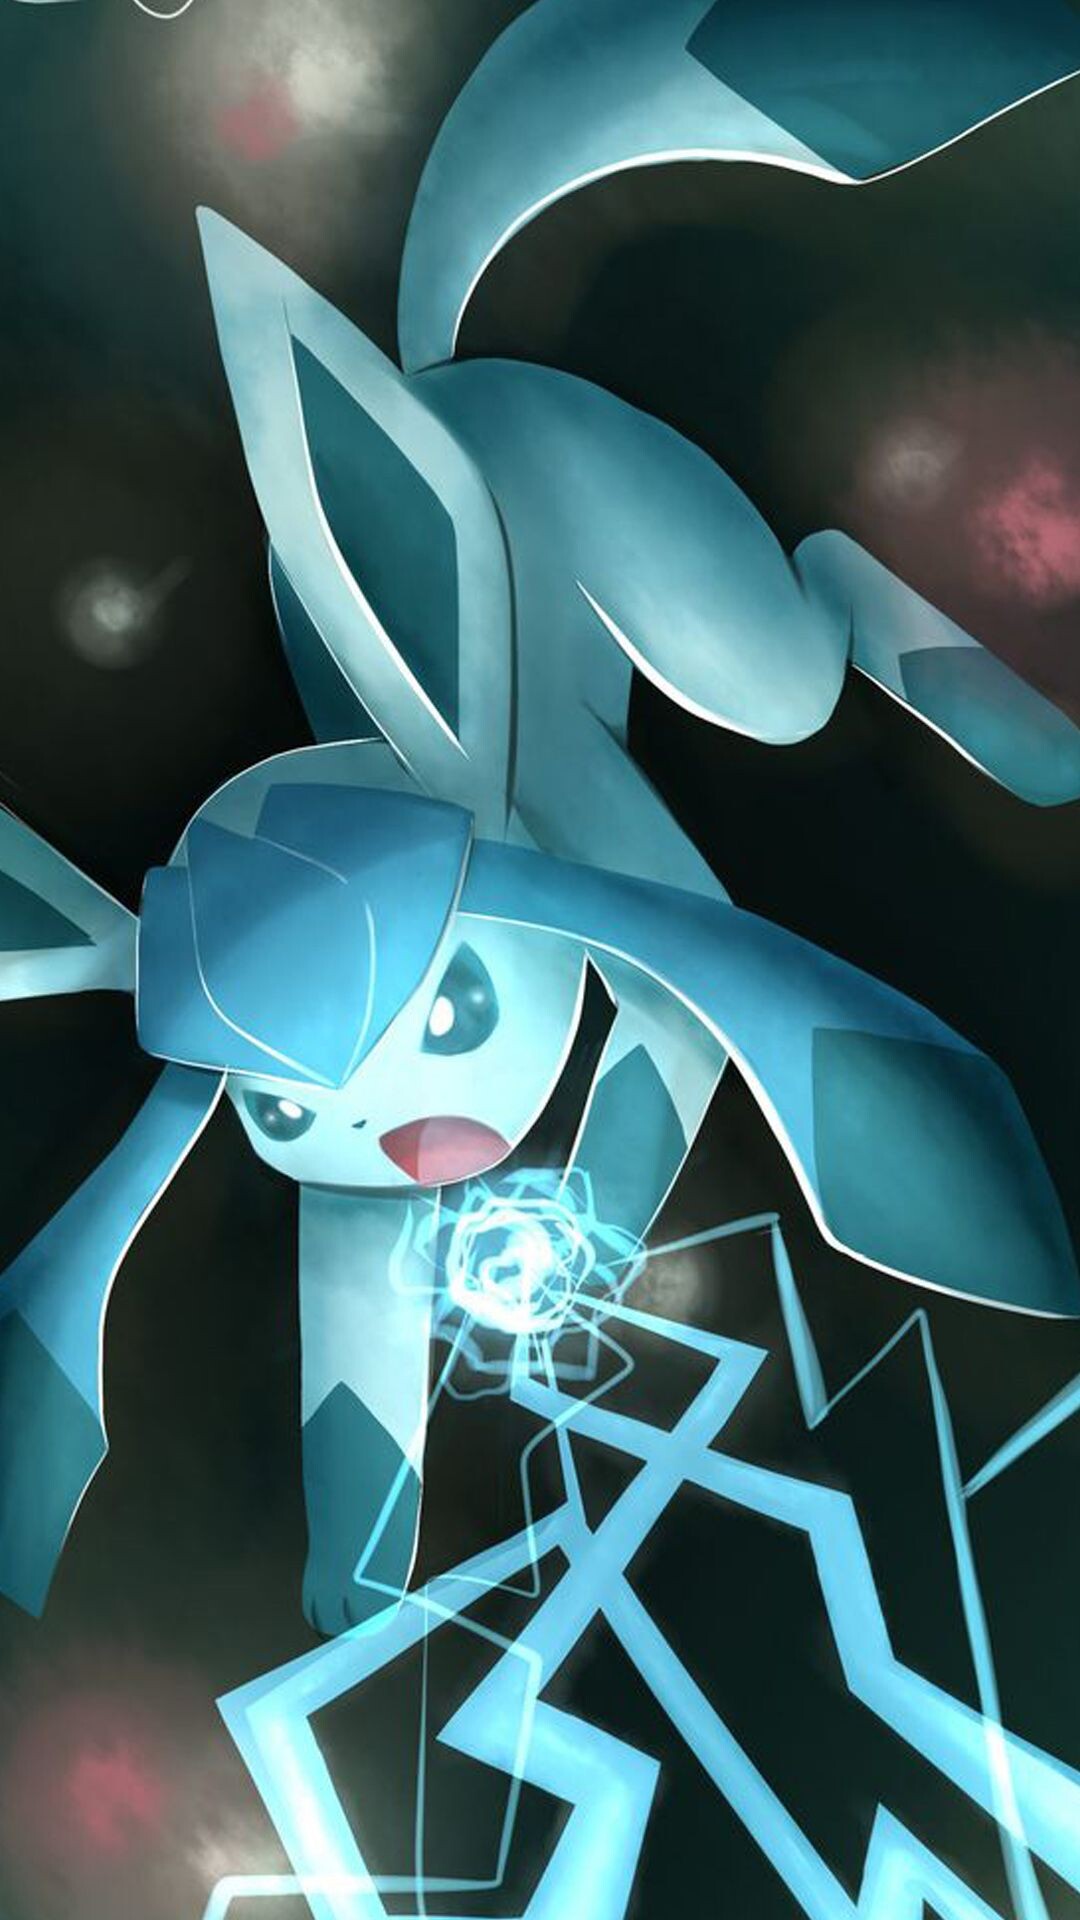 Glaceon: Pokemon shooting the spiky icicle fur, Icy breath, Known as the Fresh Snow Pokemon. 1080x1920 Full HD Background.